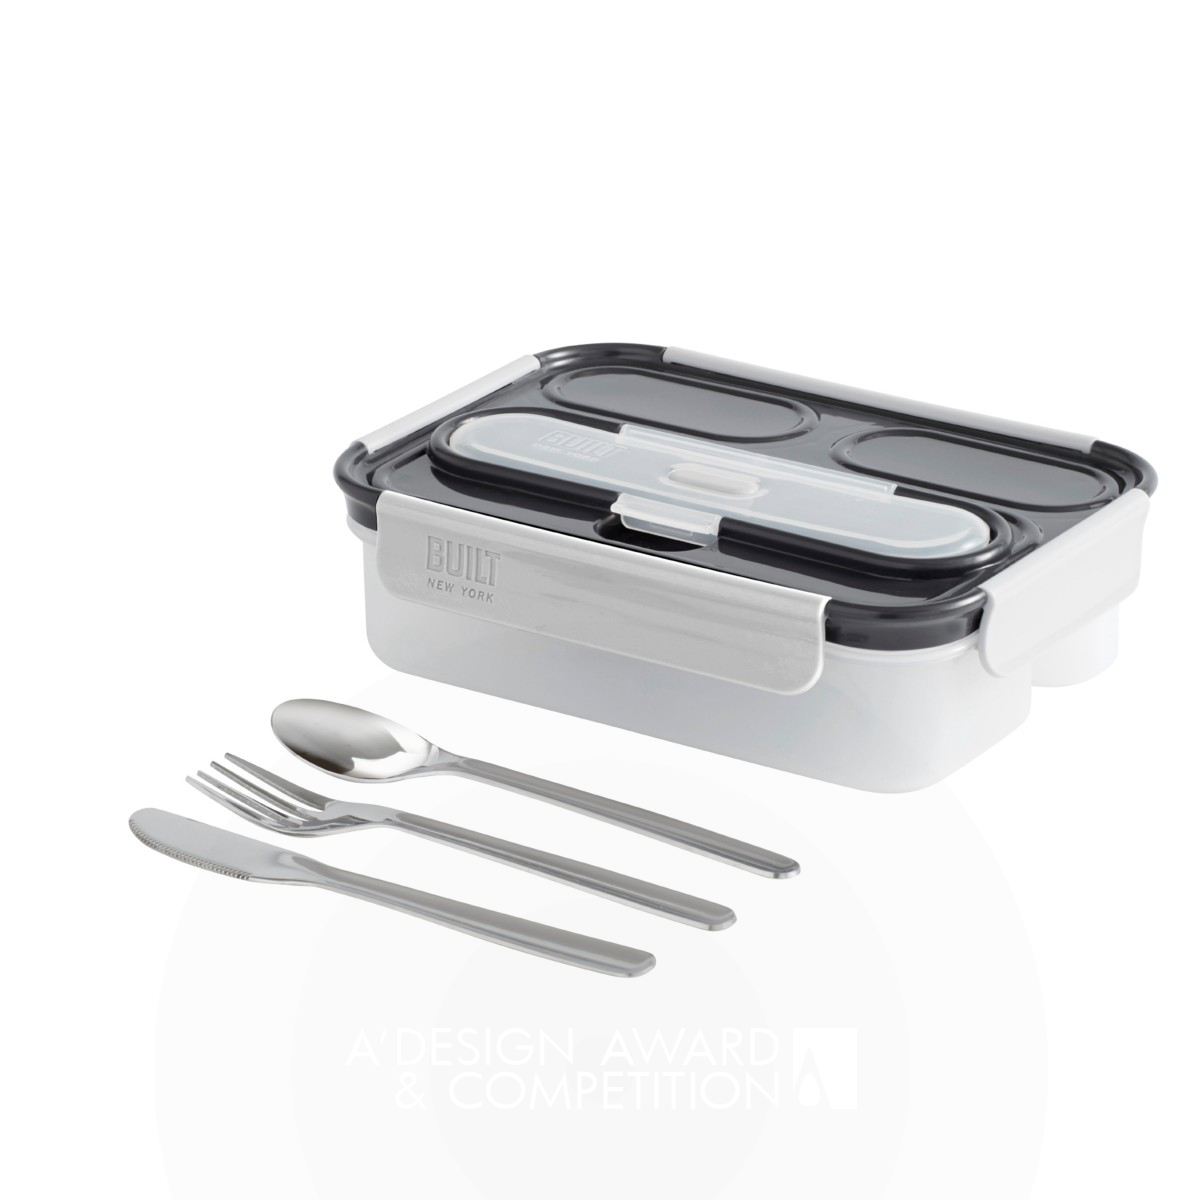 3 Compartment Gourmet Bento Lunch Container with utensils by Built NY